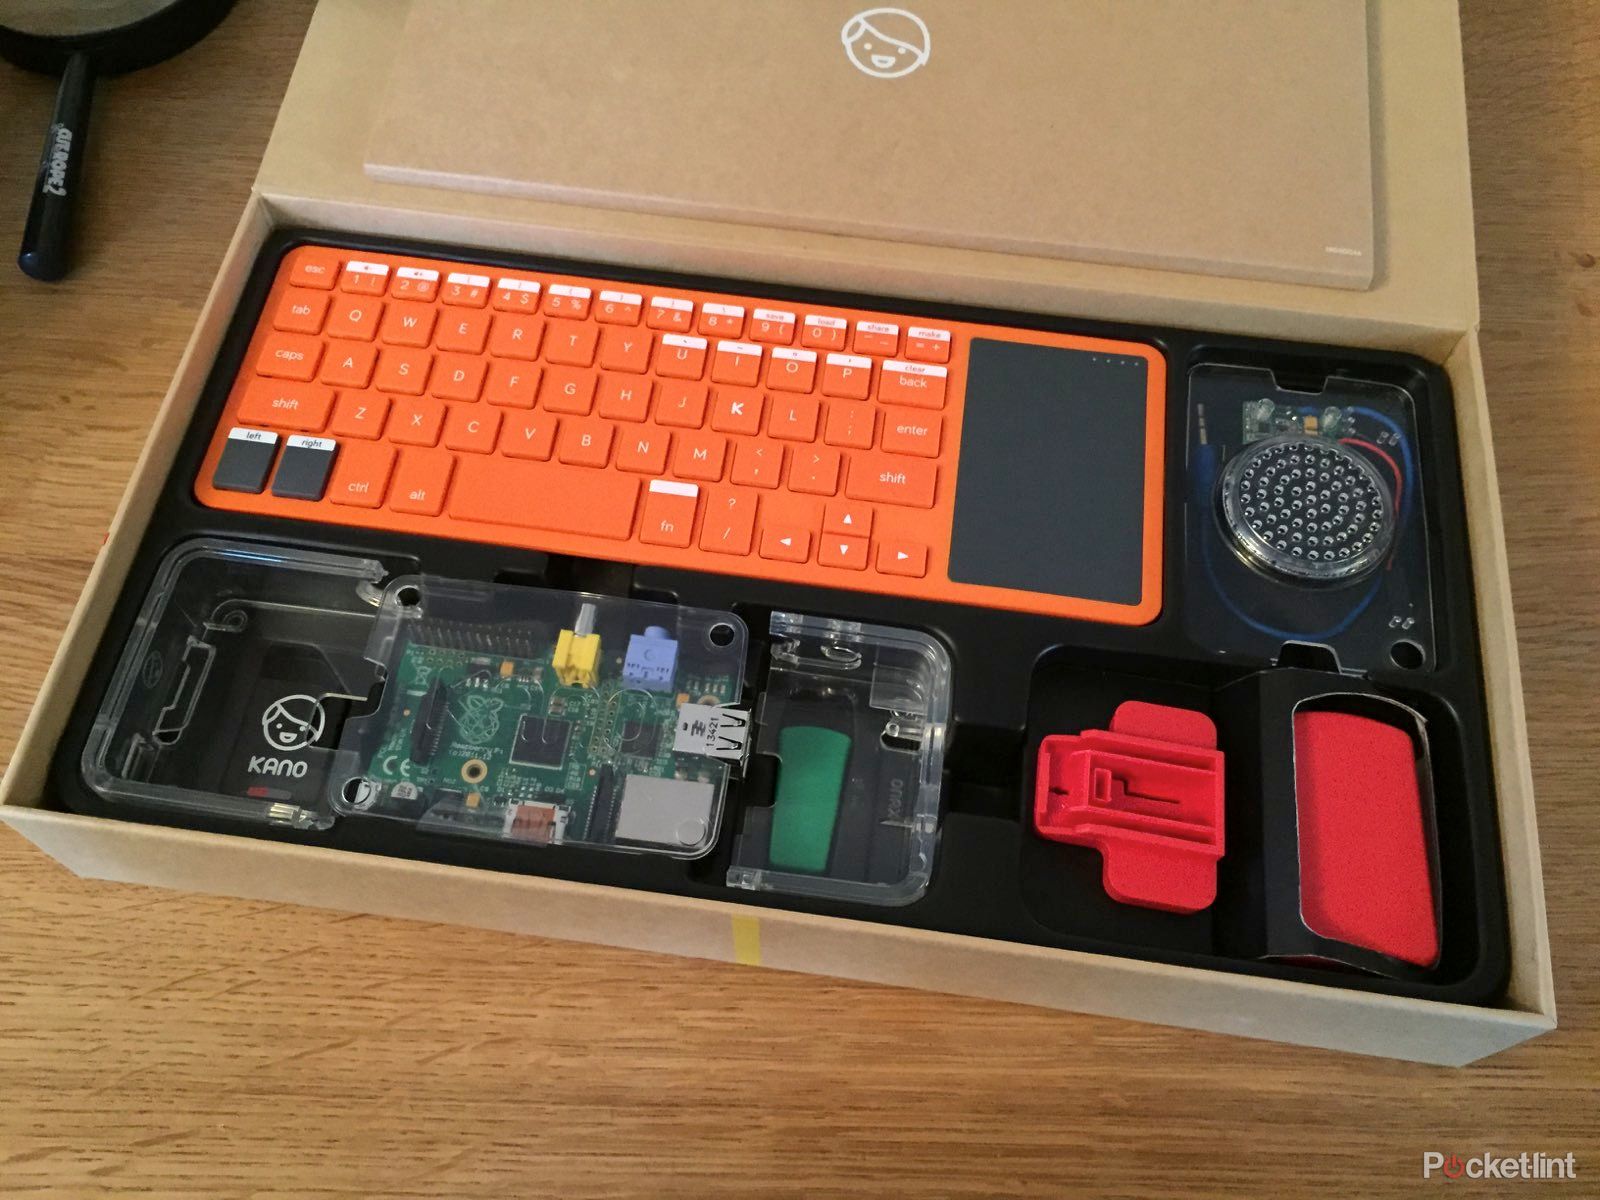 kano the build your own pc for kids that brings coding to your living room image 1